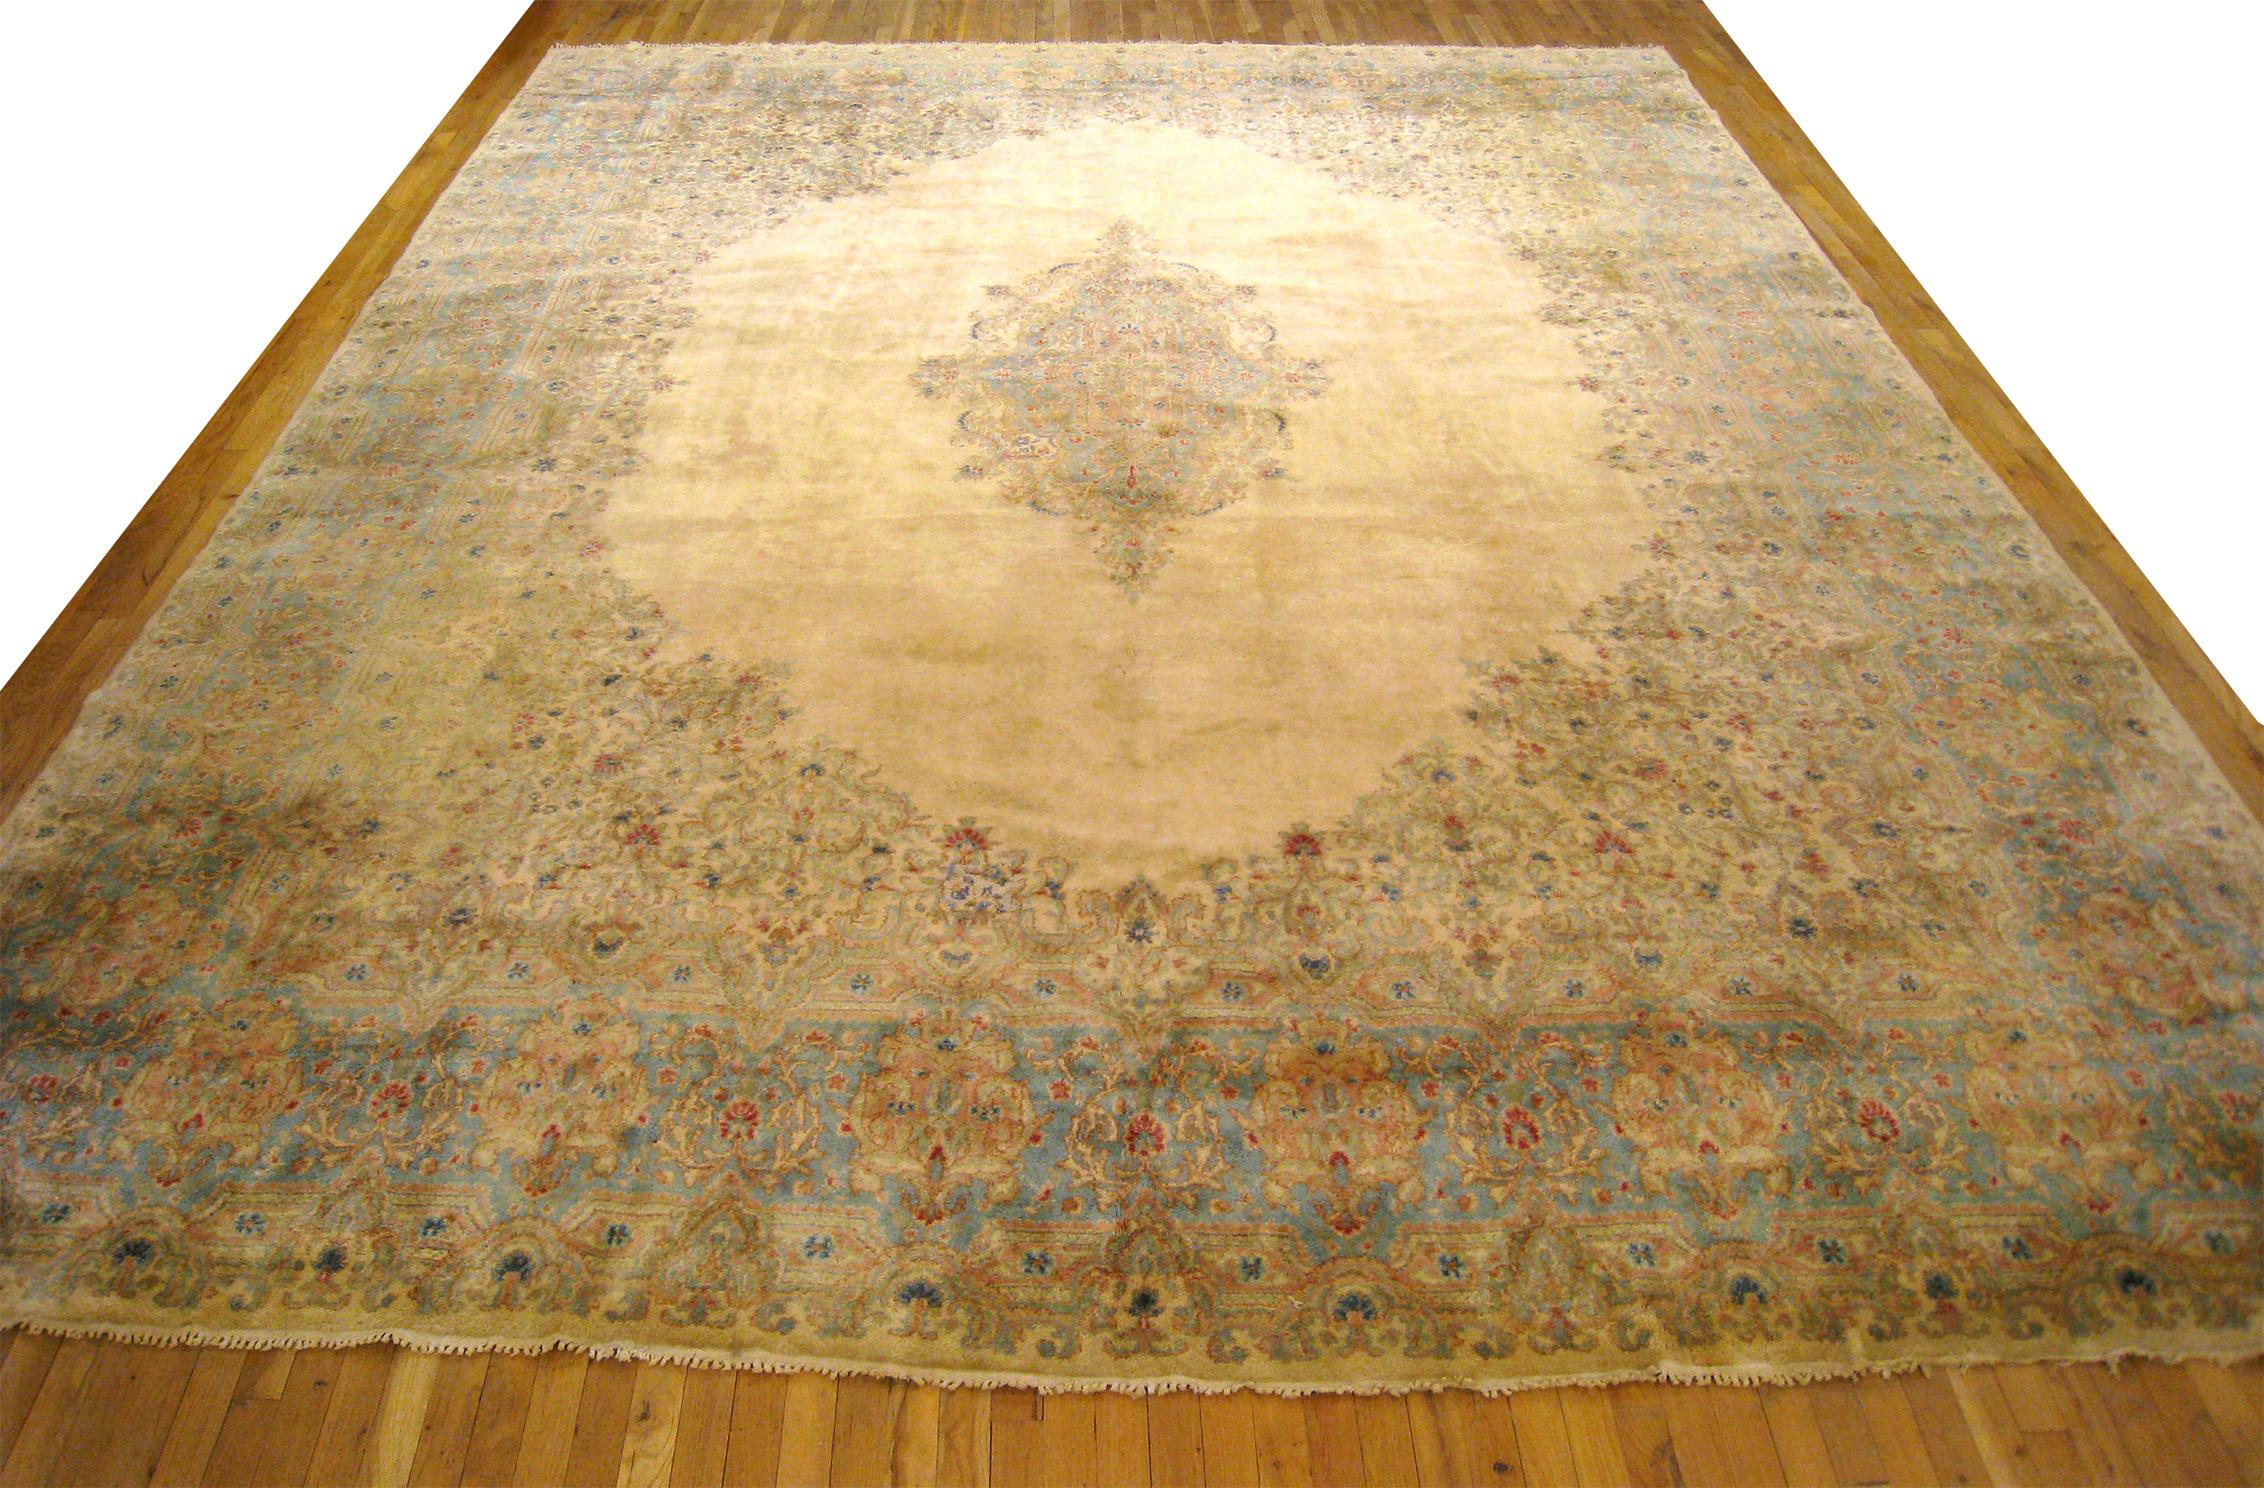 Vintage Persian Kerman rug, circa 1950, size 15'4 H x 11'6 W. This semi-antique hand knotted Persian rug features a striking open ivory central field, with a softly hued floral array in the corners and outer border. A small medallion punctuates the